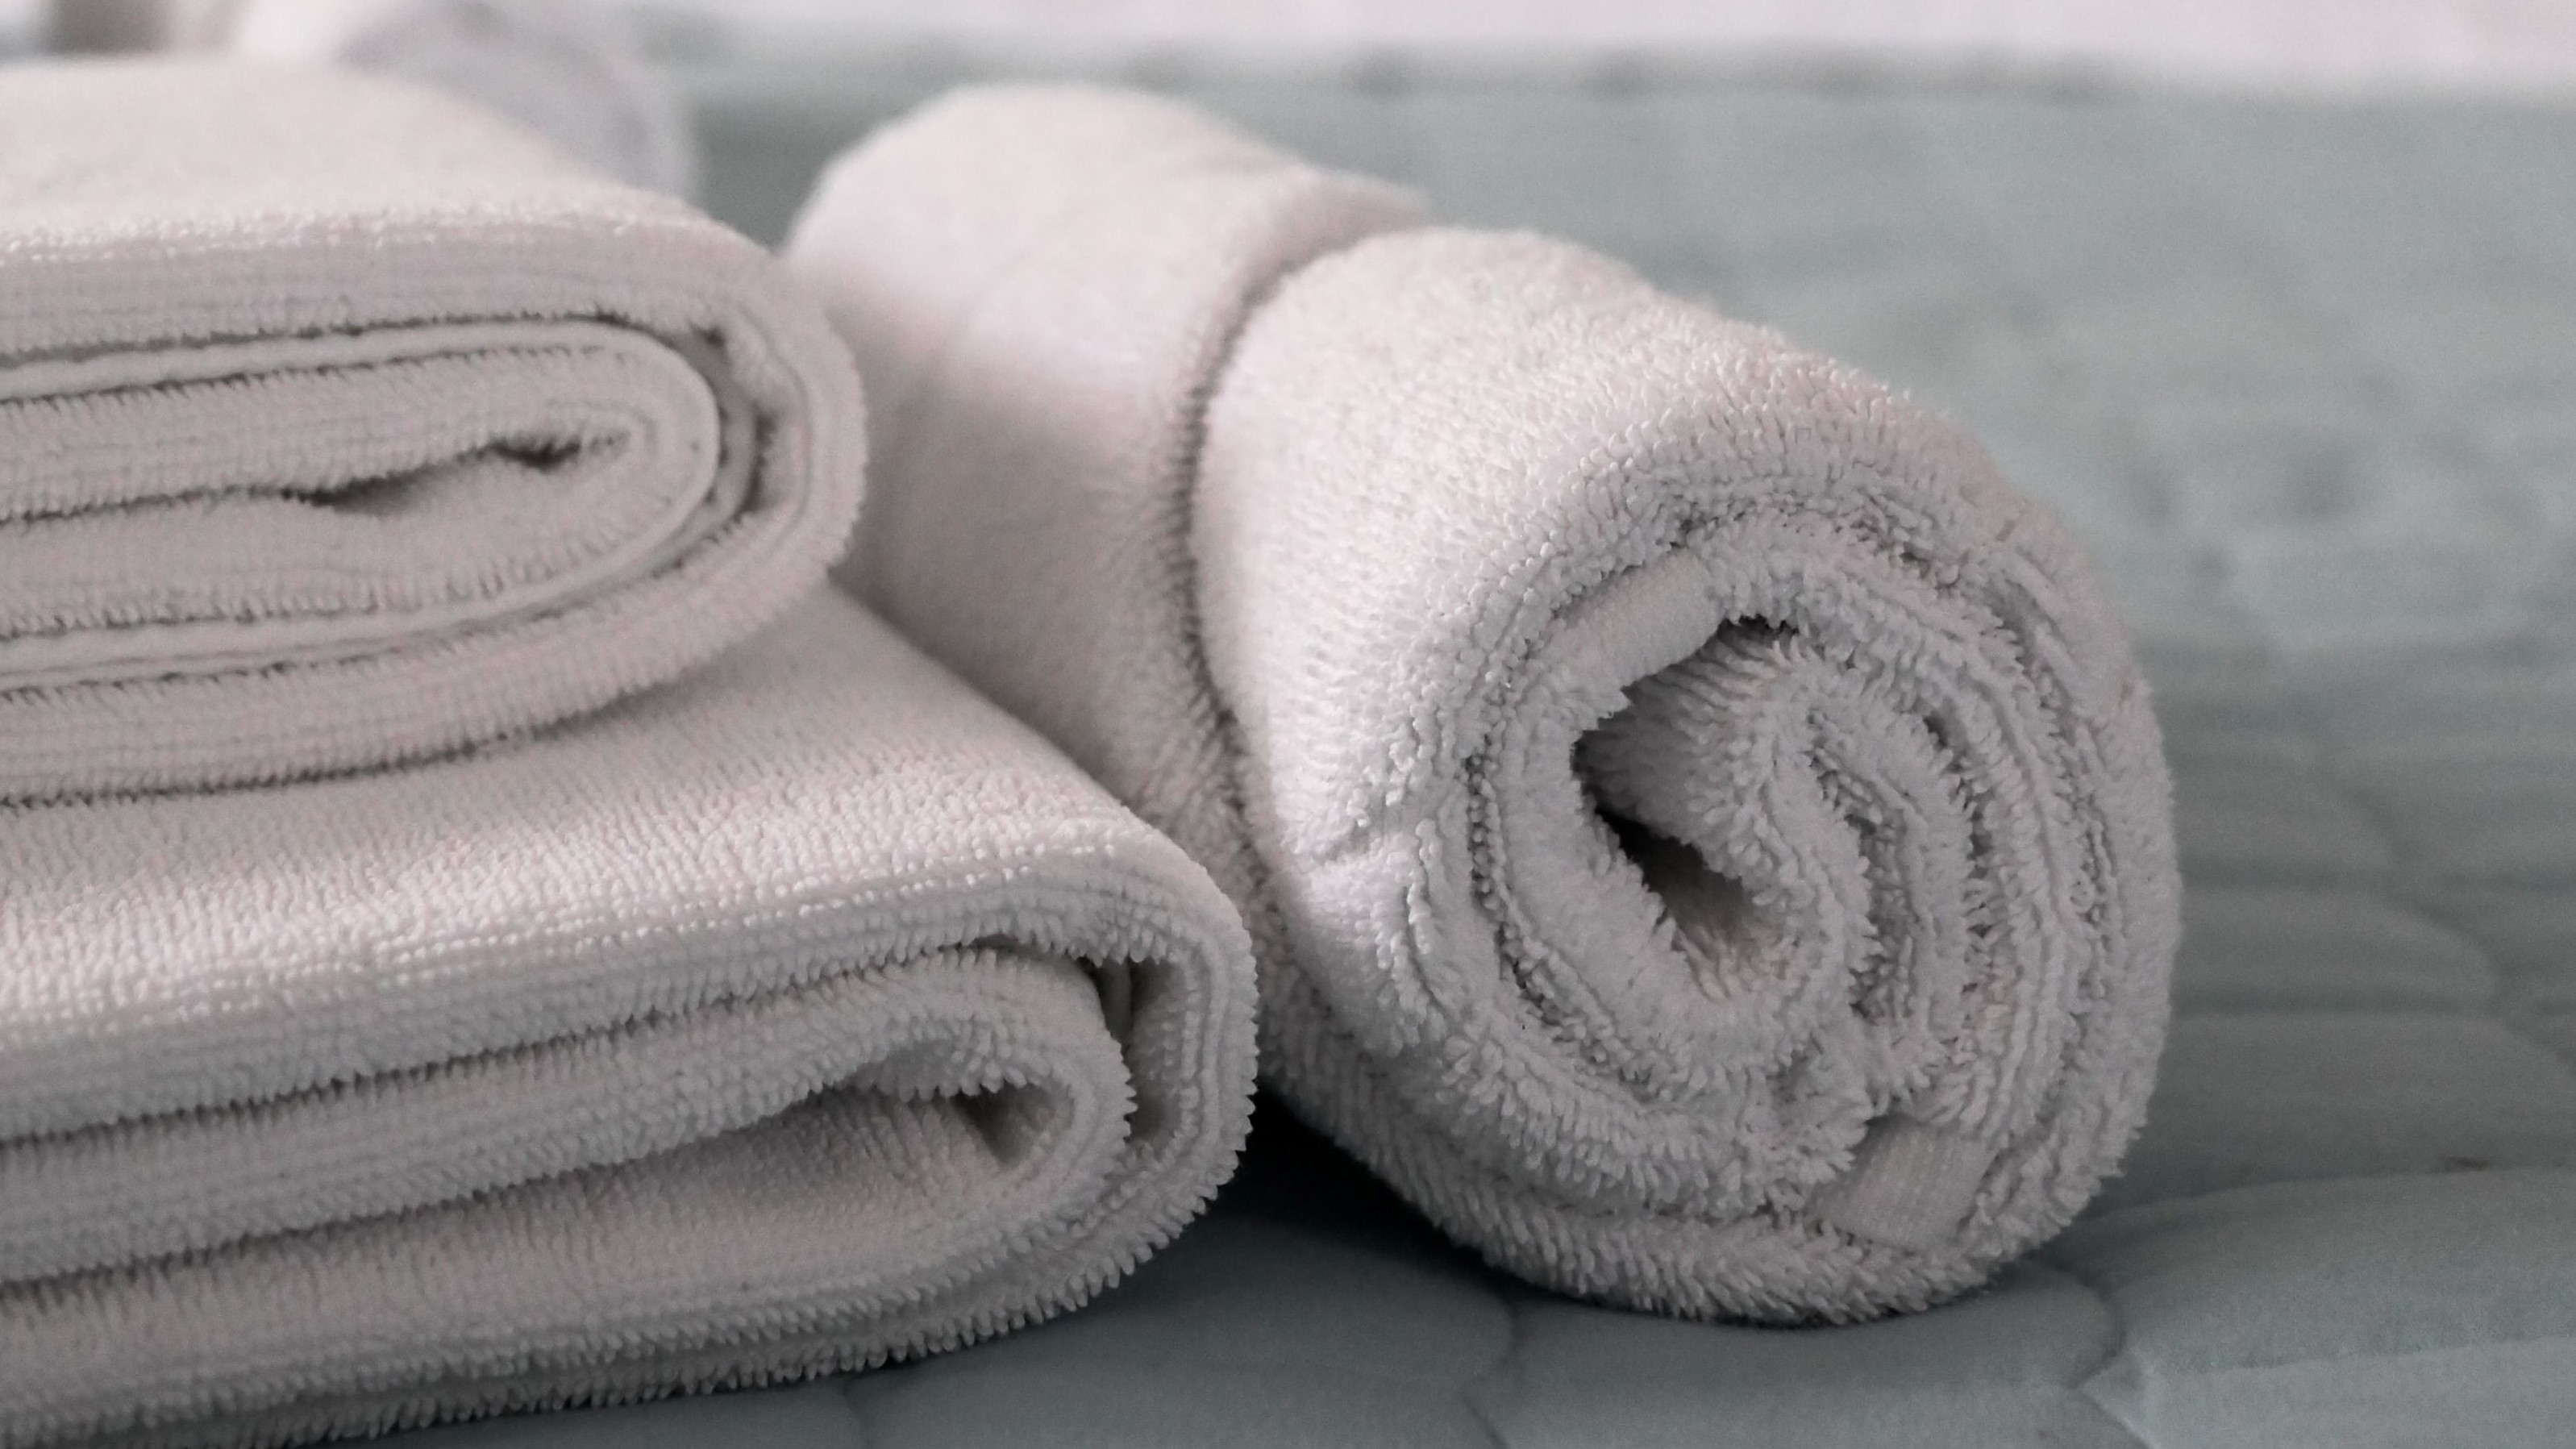 How to Fold and Style Your Towels Like a Luxury Hotel